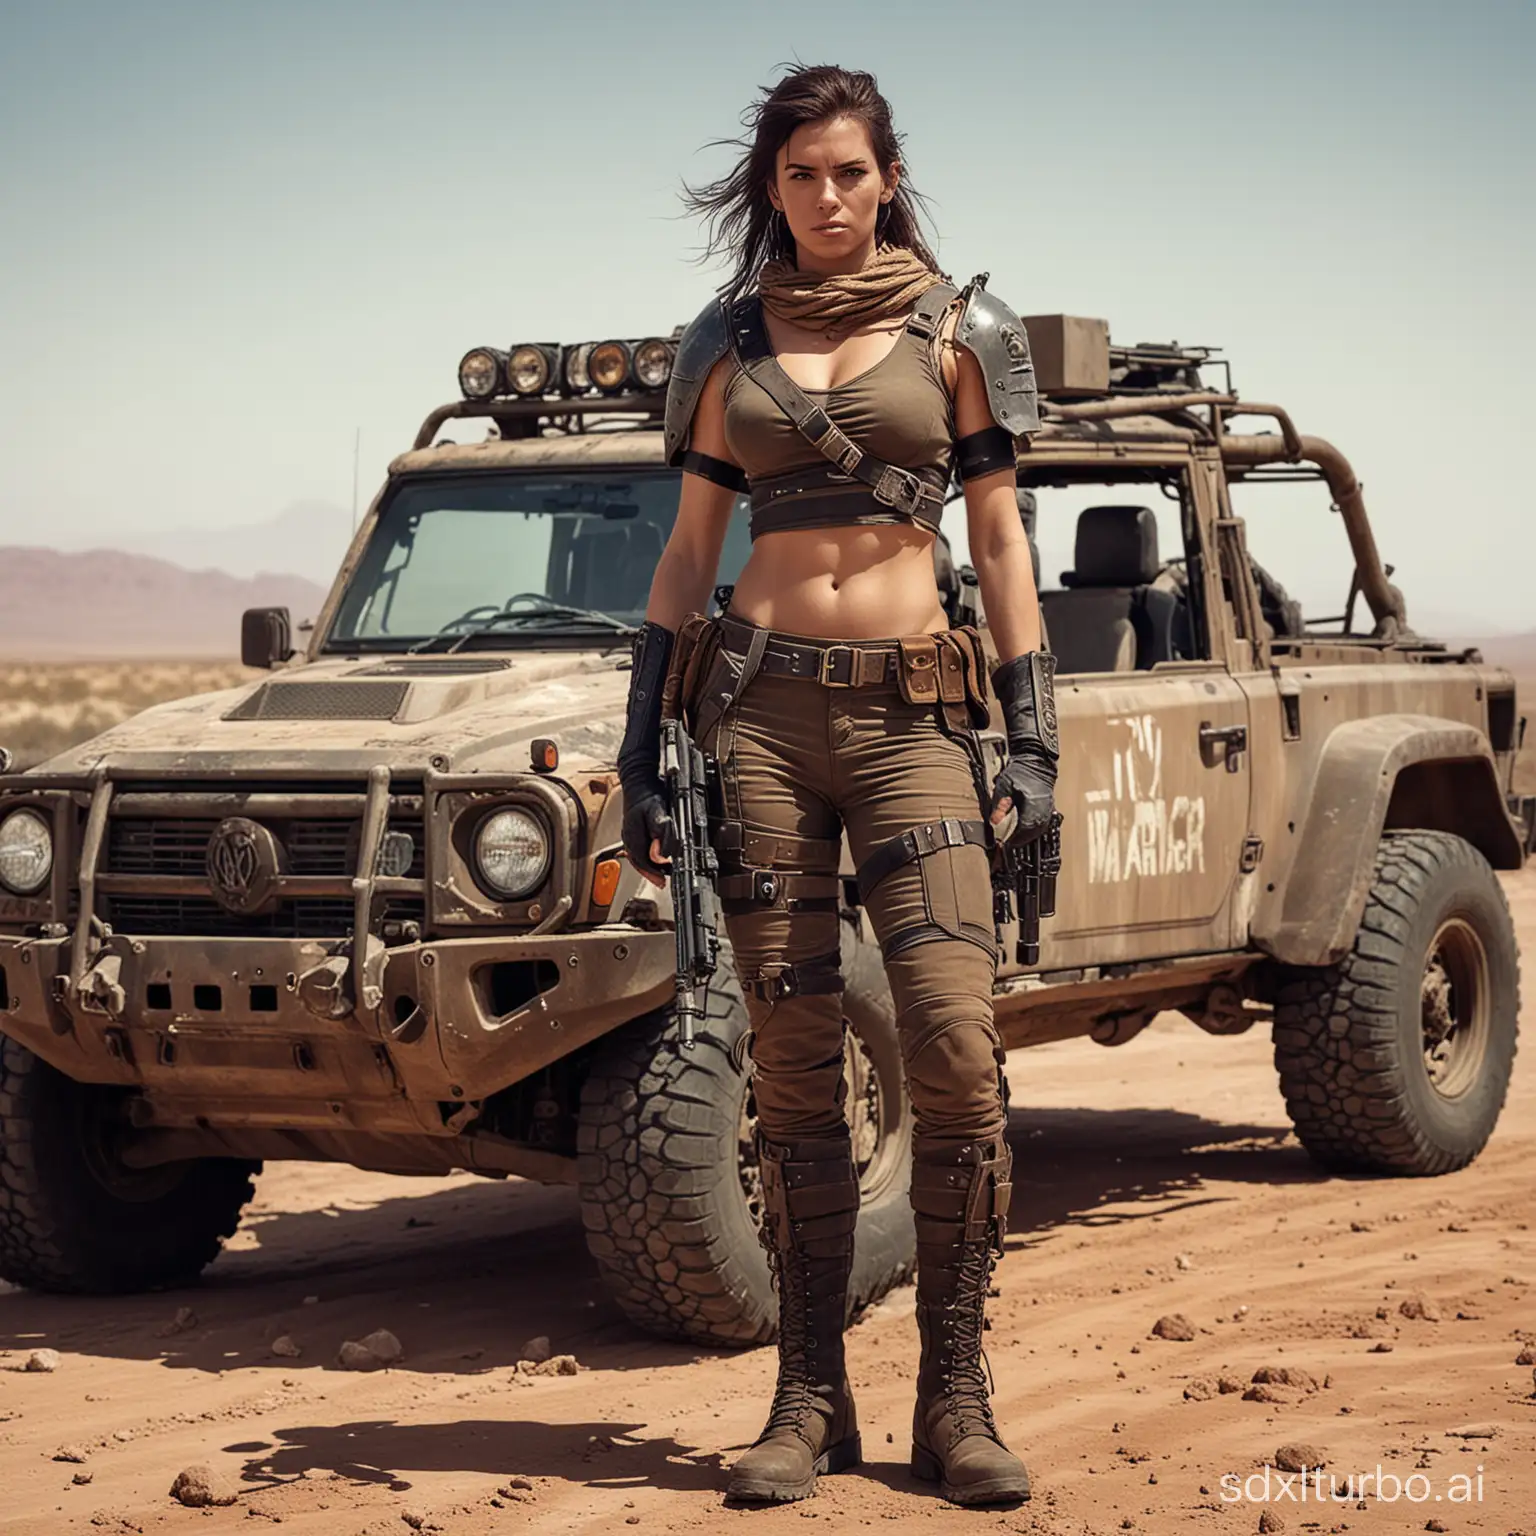 Wasteland-style female warrior, in the desert, behind stopped an off-road vehicle, cool, badass